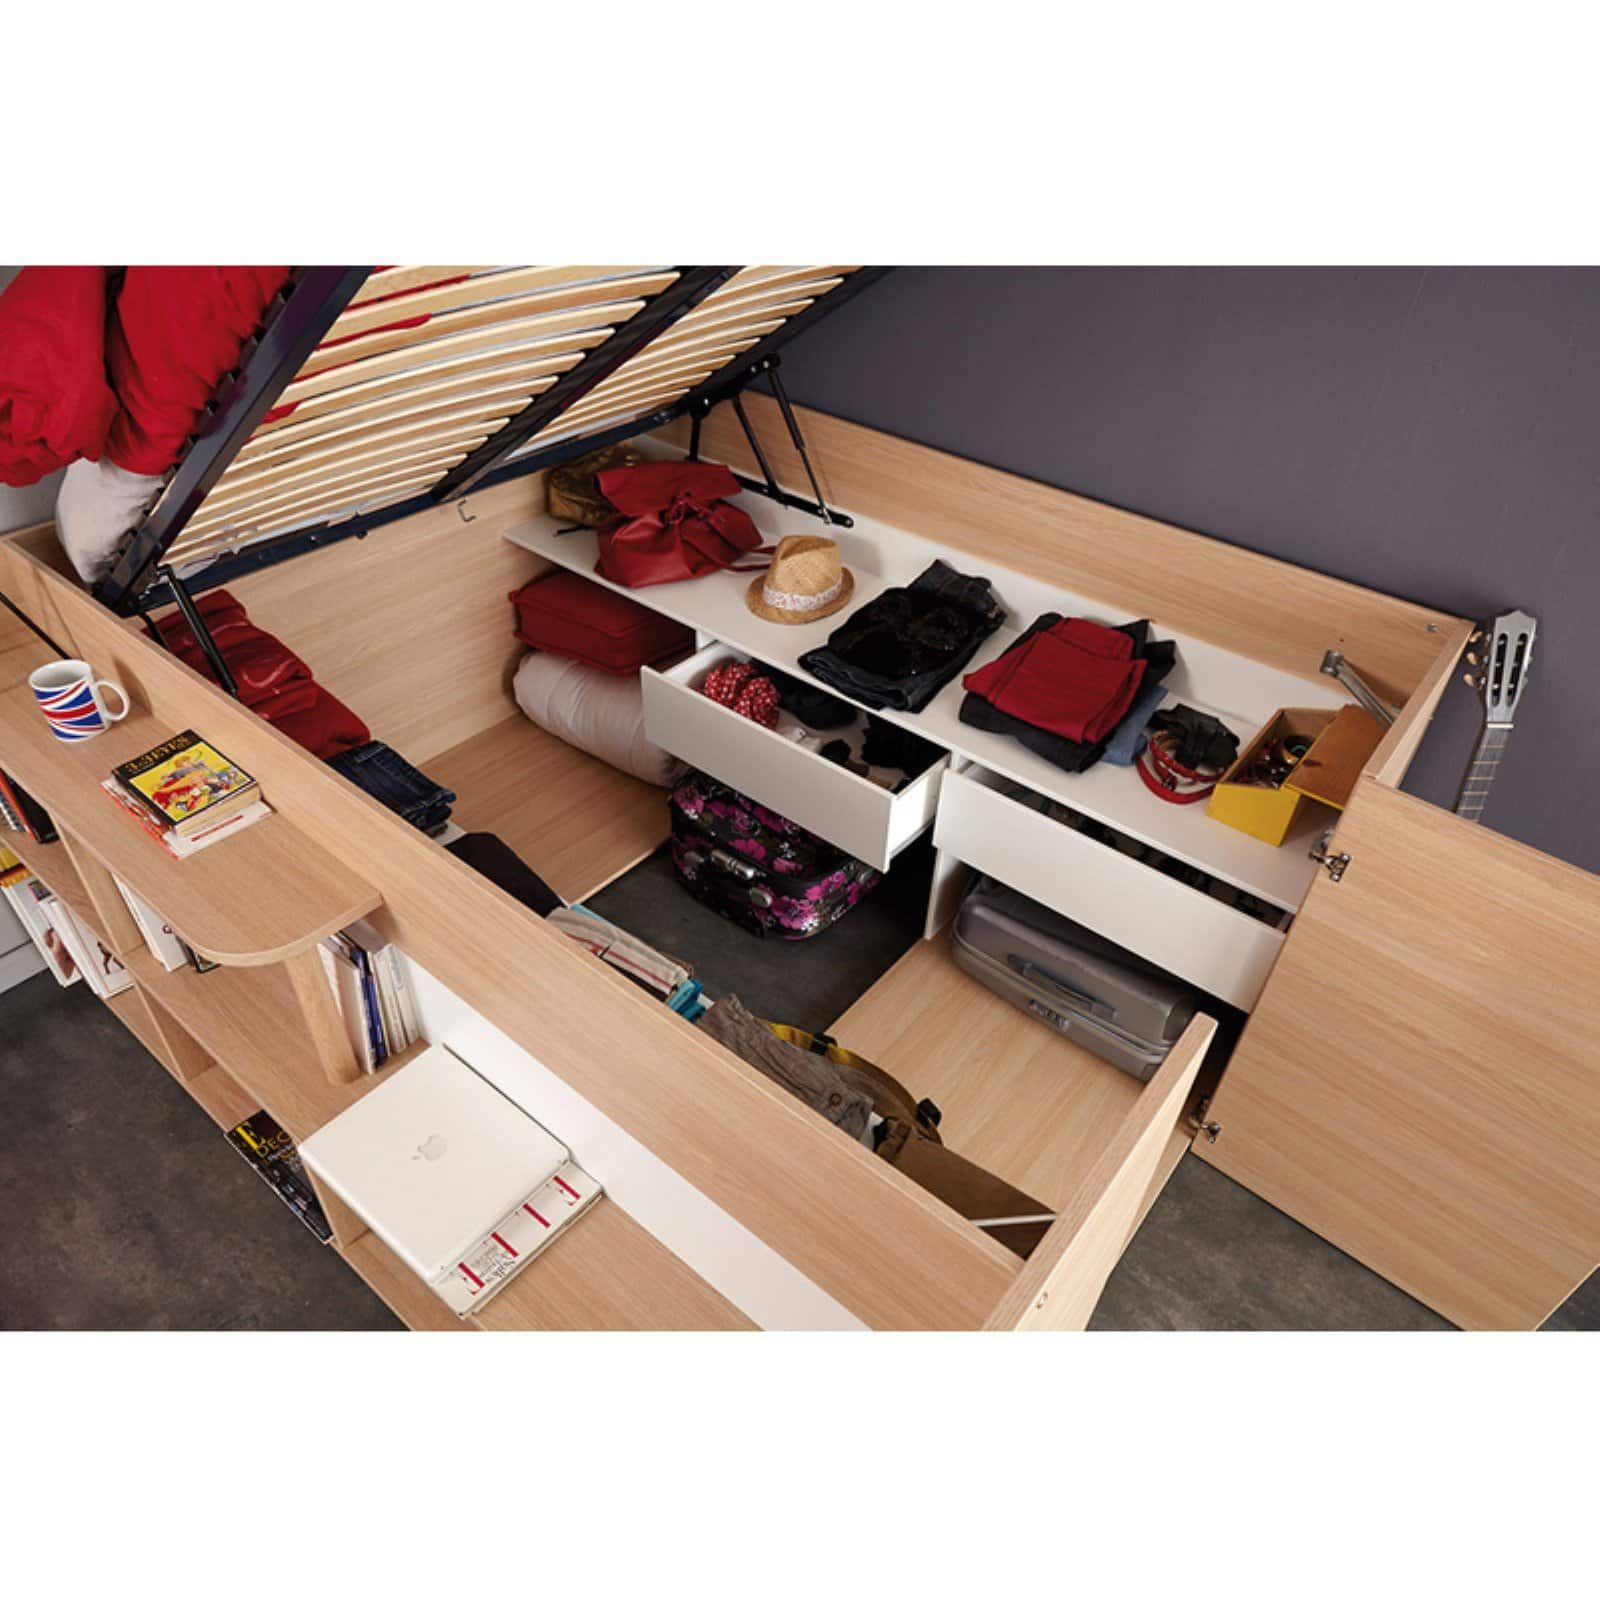 https://www.arch2o.com/wp-content/uploads/2020/07/Arch2O-innovative-space-saving-furniture-for-compact-apartments-3.jpeg